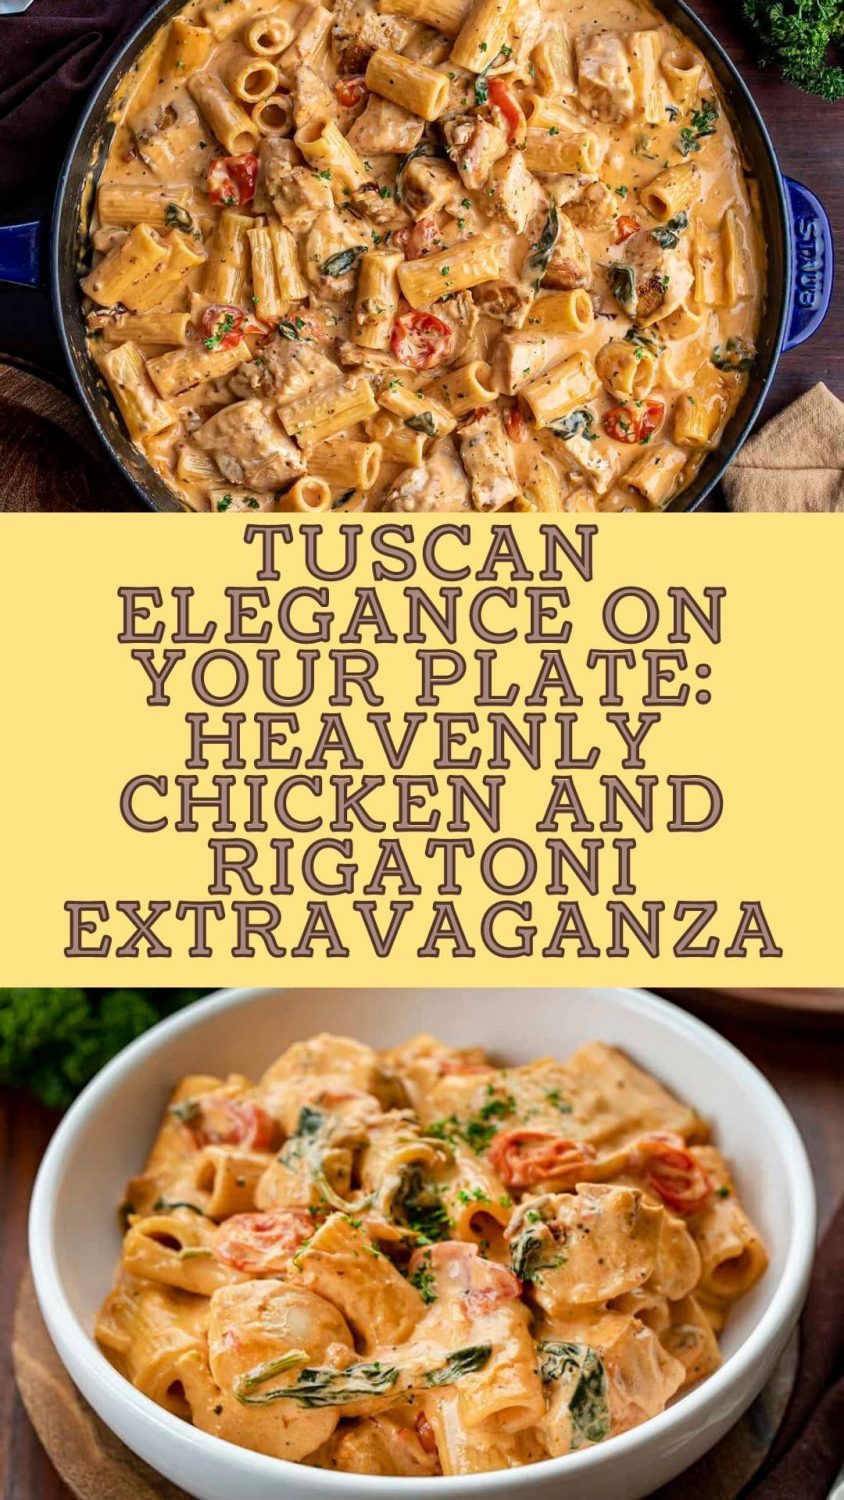 Tuscan Elegance on Your Plate: Heavenly Chicken and Rigatoni Extravaganza